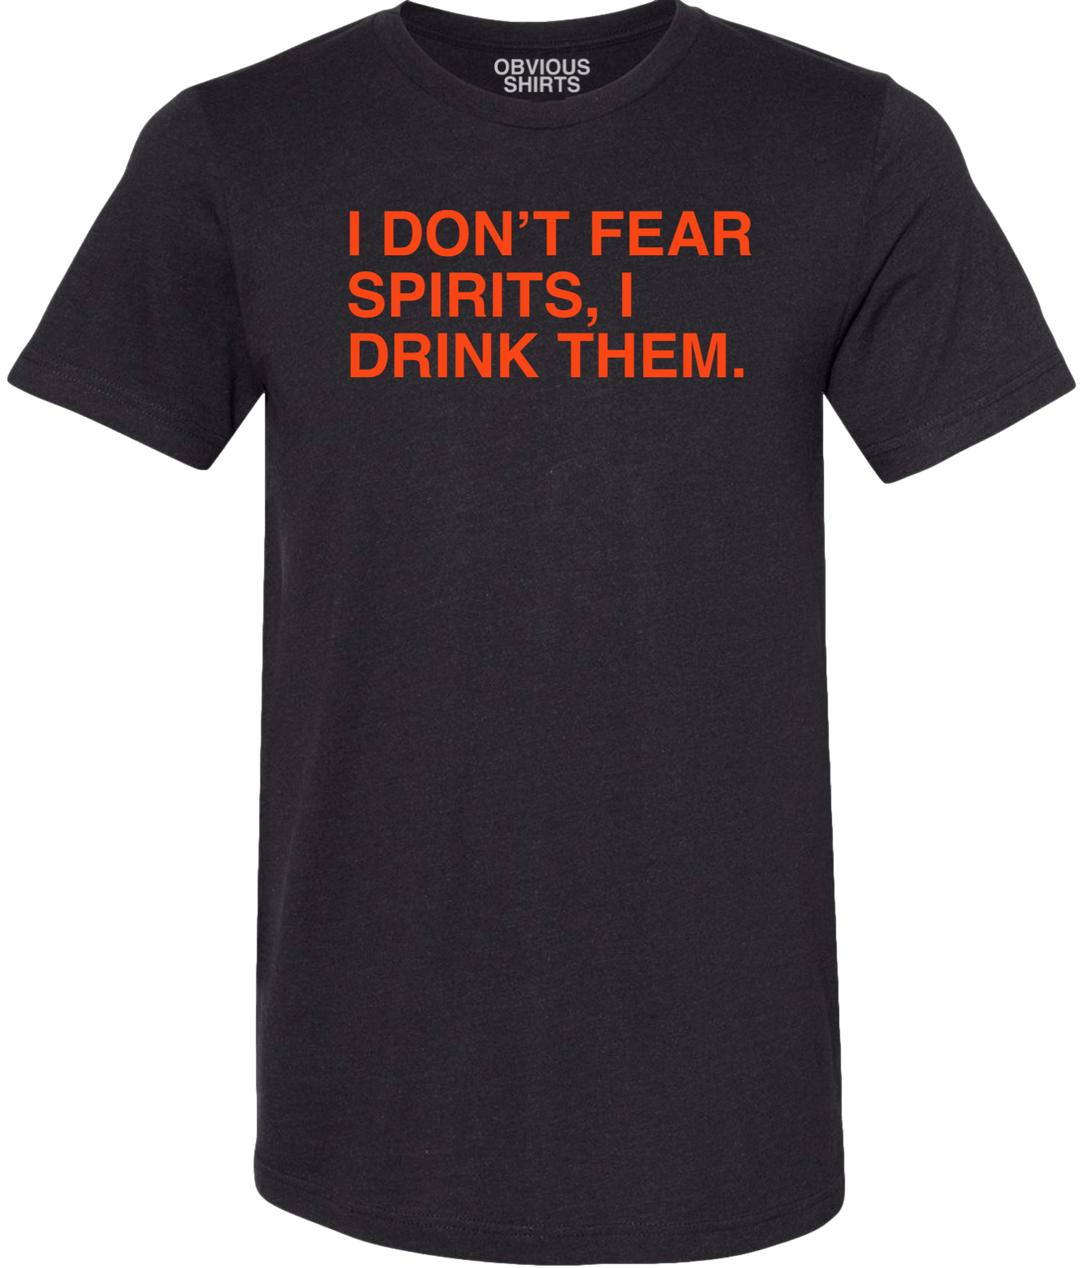 I DON'T FEAR SPIRITS, I DRINK THEM. - OBVIOUS SHIRTS